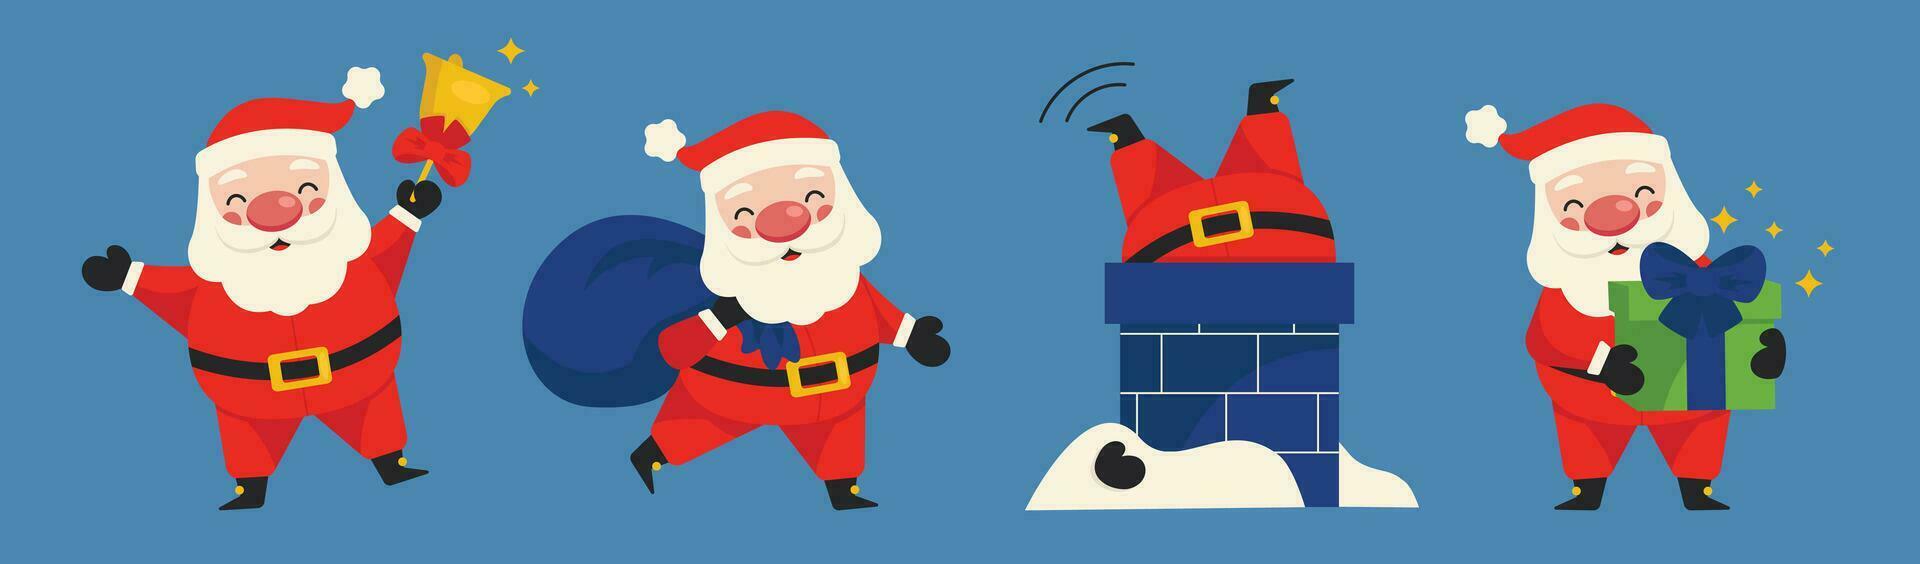 Set of illustrations with funny Santa Claus. Santa is ringing the bell, standing in the chimney, carrying a bag of gifts and holding a gift box. Vector graphic.